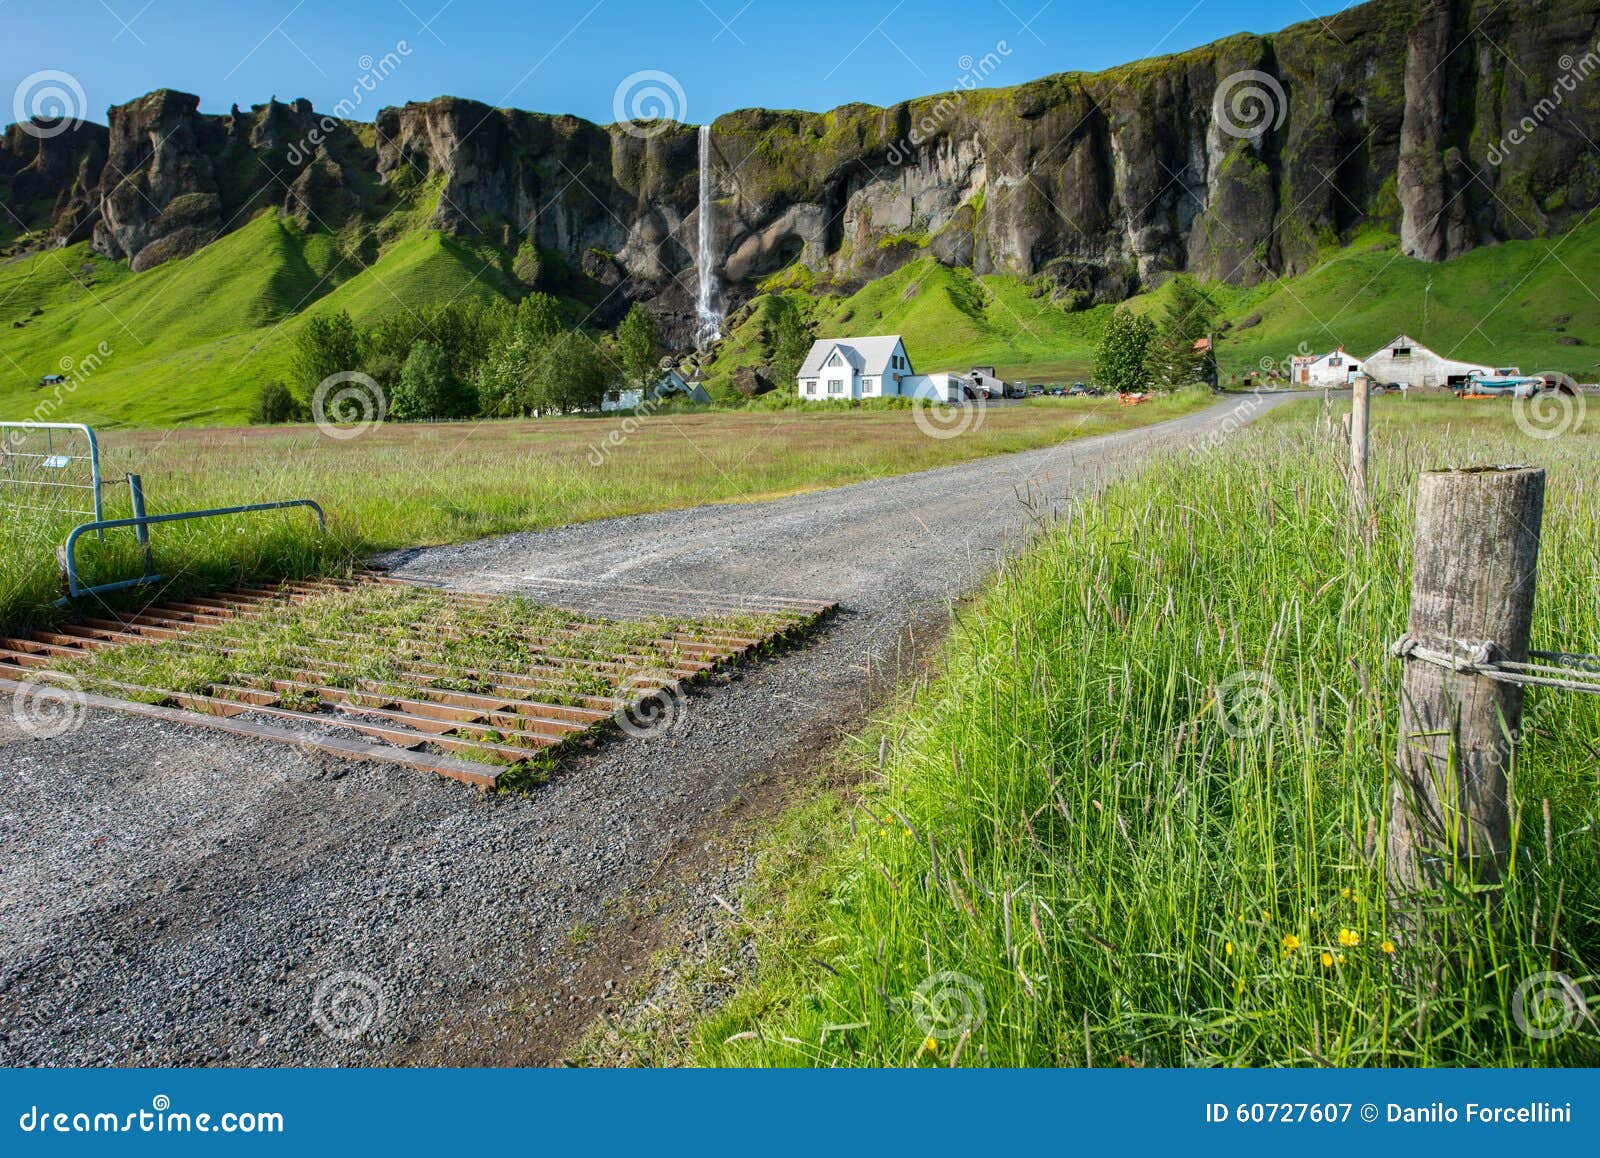 Icelandic countryside stock image. Image of hill, tourism - 60727607